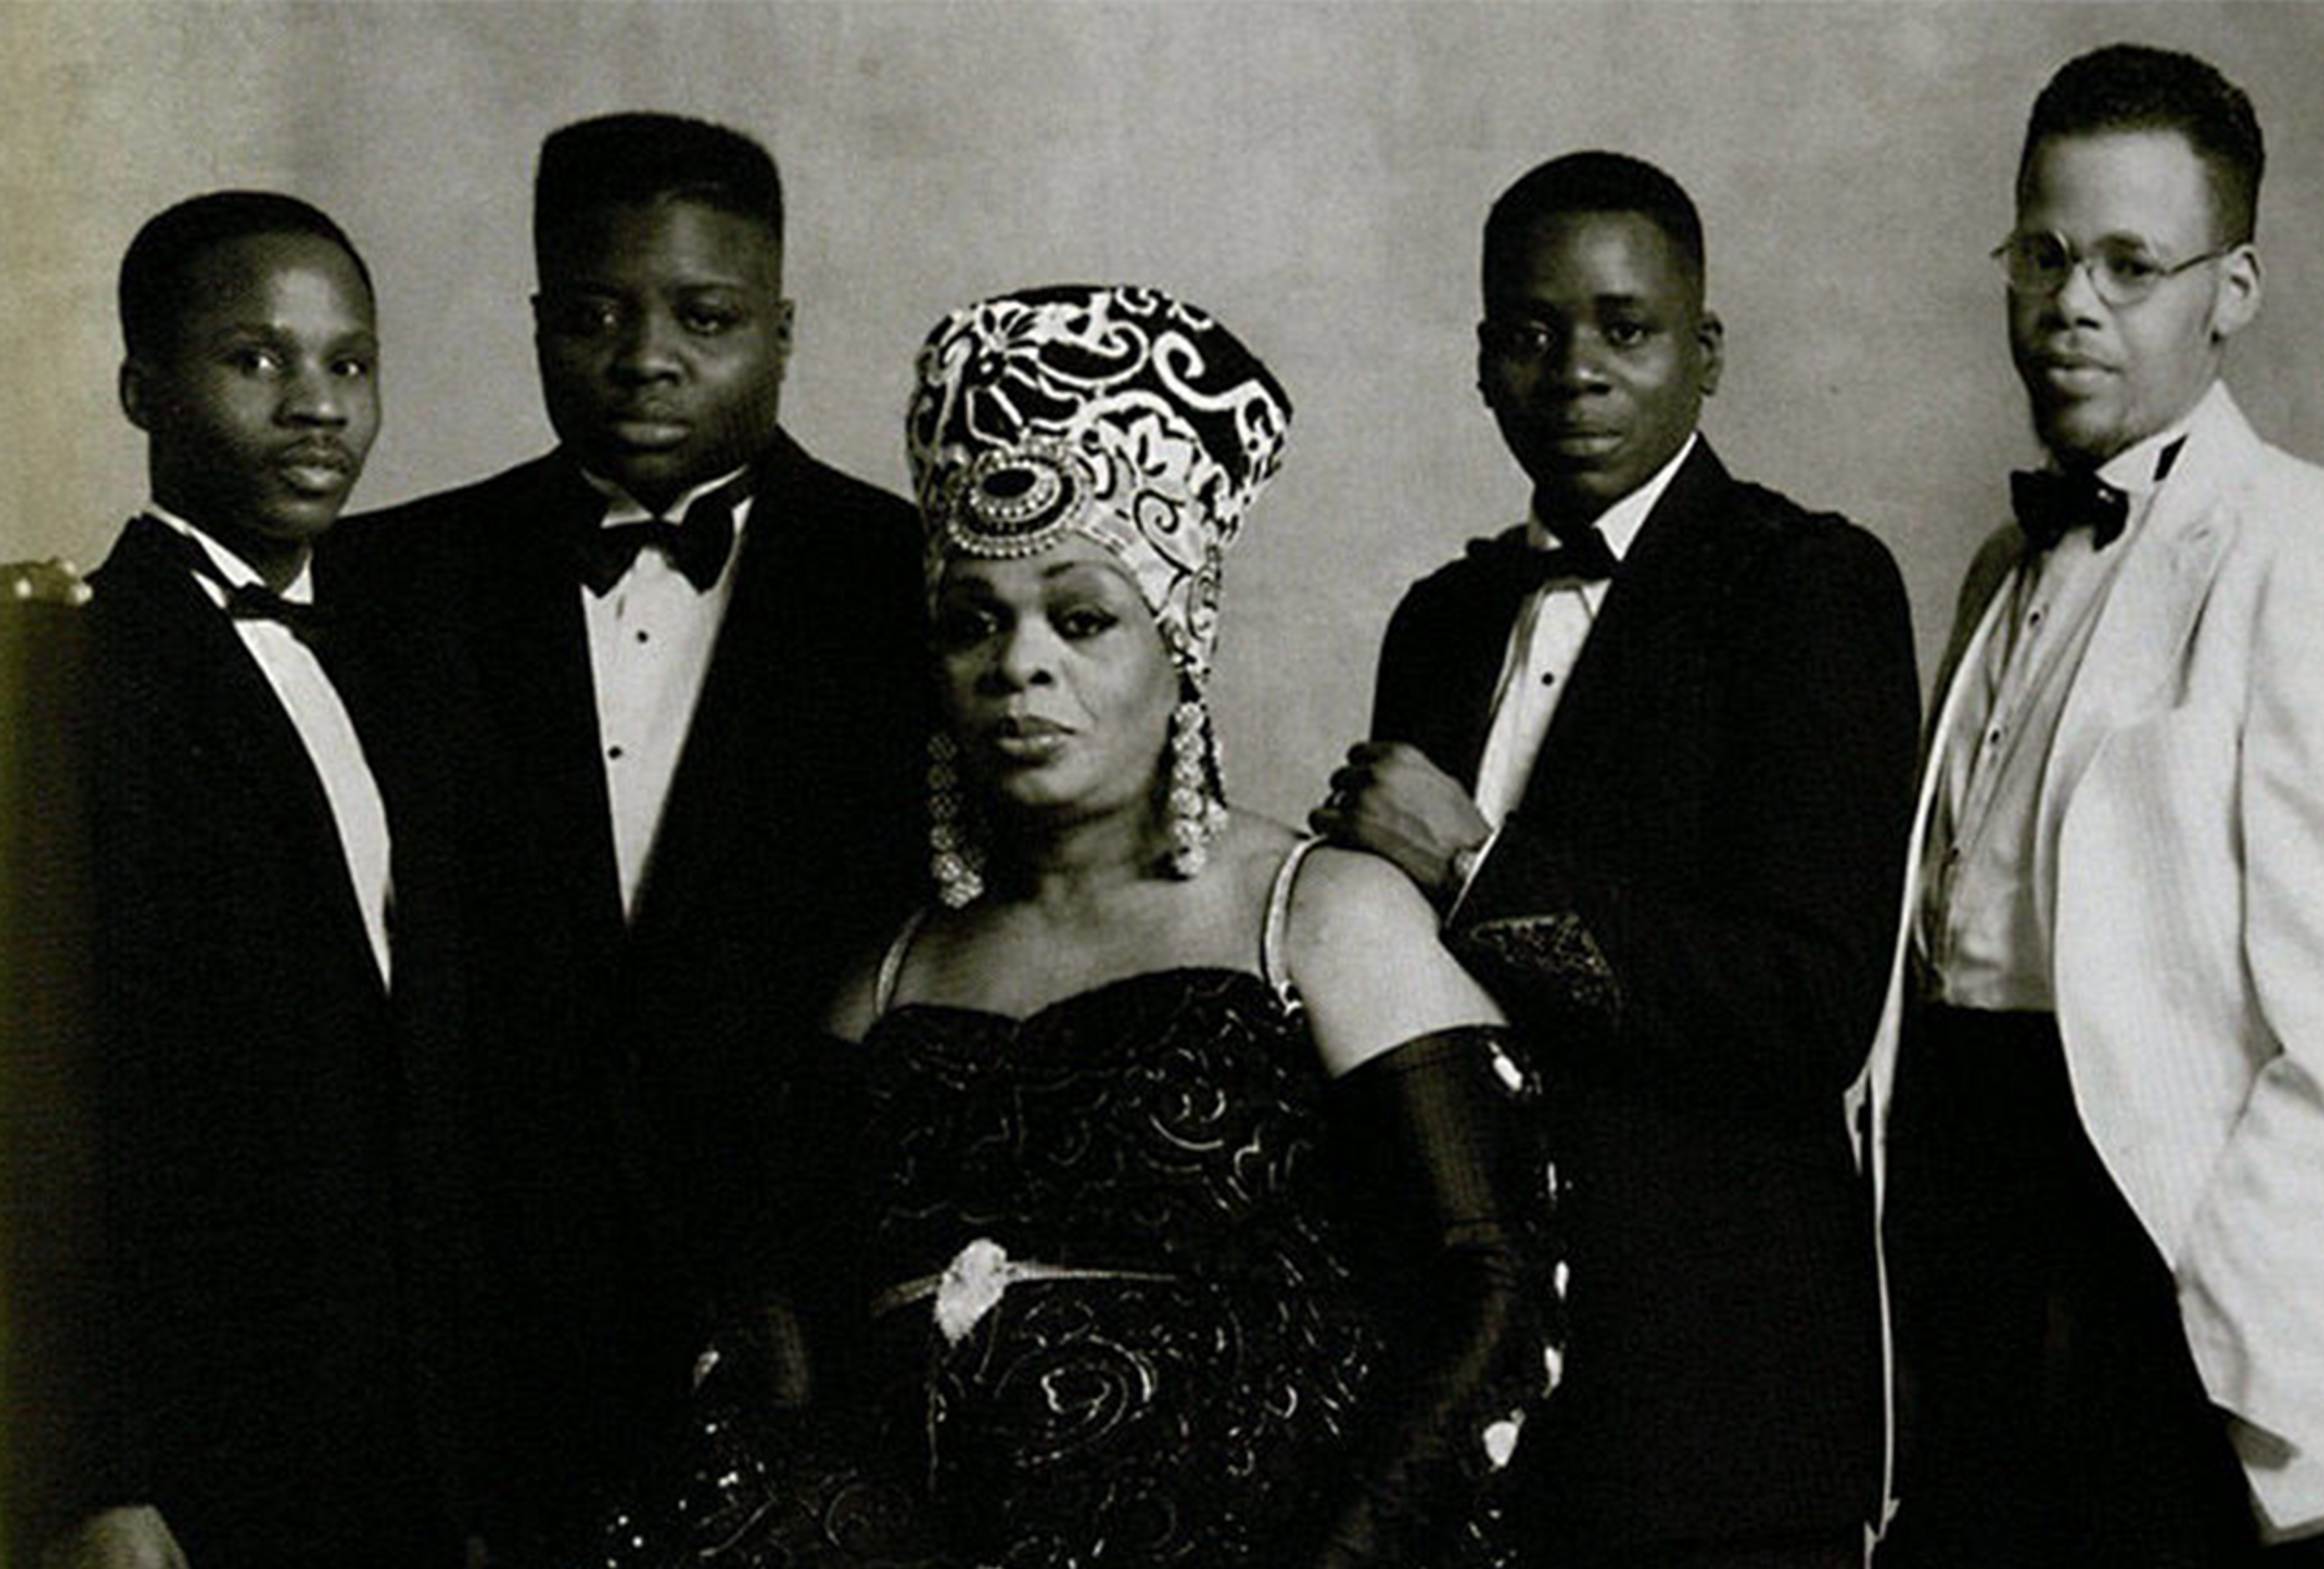 Black and white image of 5 Black queer folks posing from "Voguing and the ballroom scene of New York City" 1989-92 (London: Soul Jazz Records, 2011)